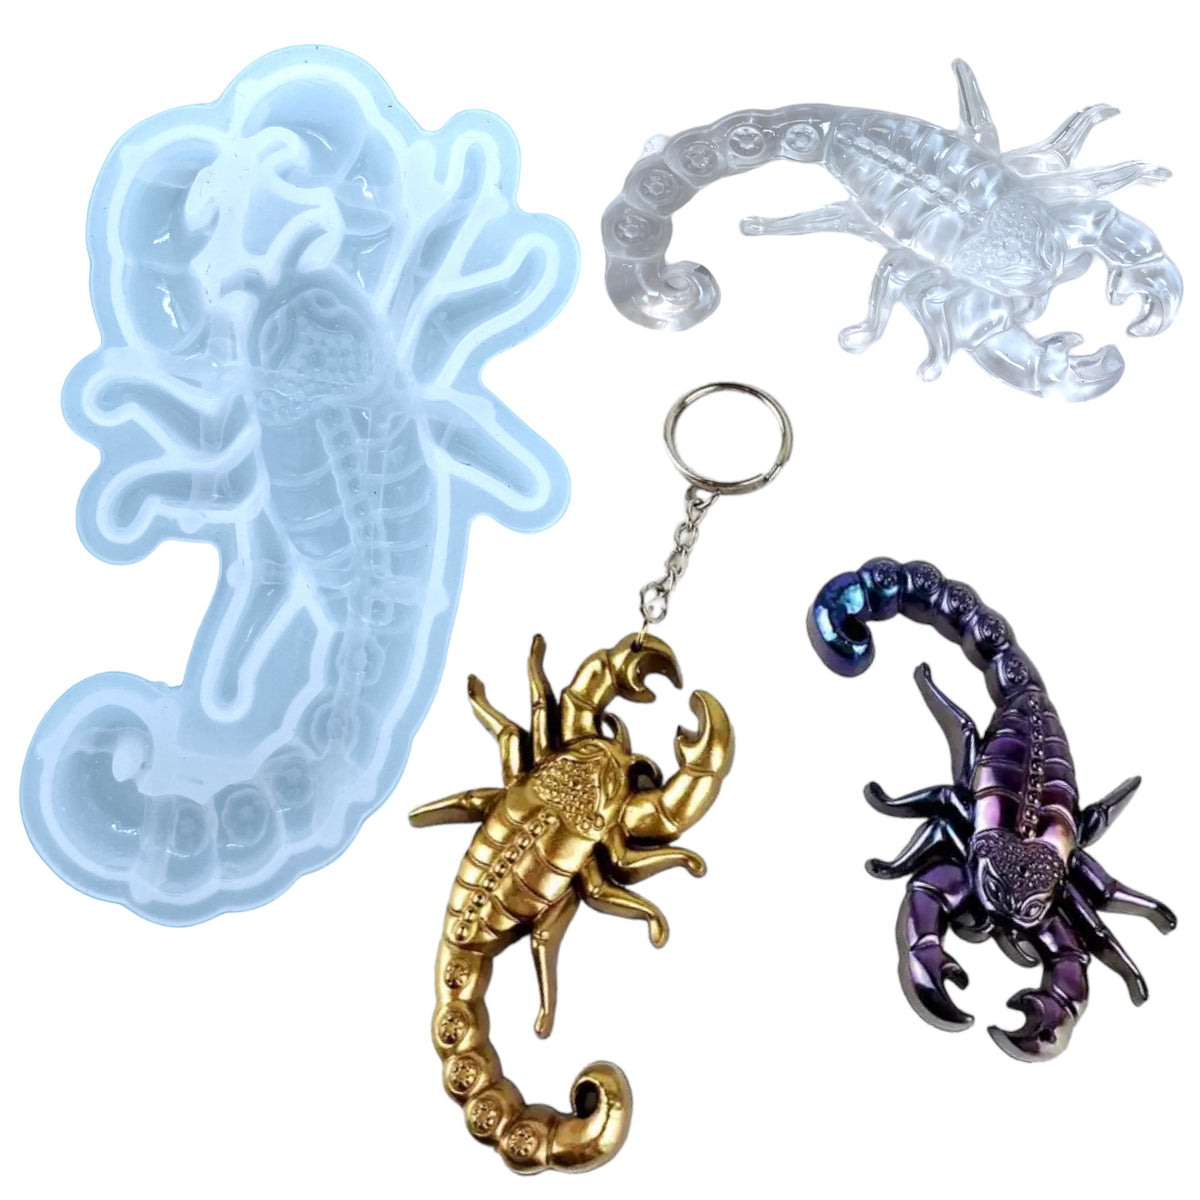 2D Scorpion Mold for UV and Epoxy Resin